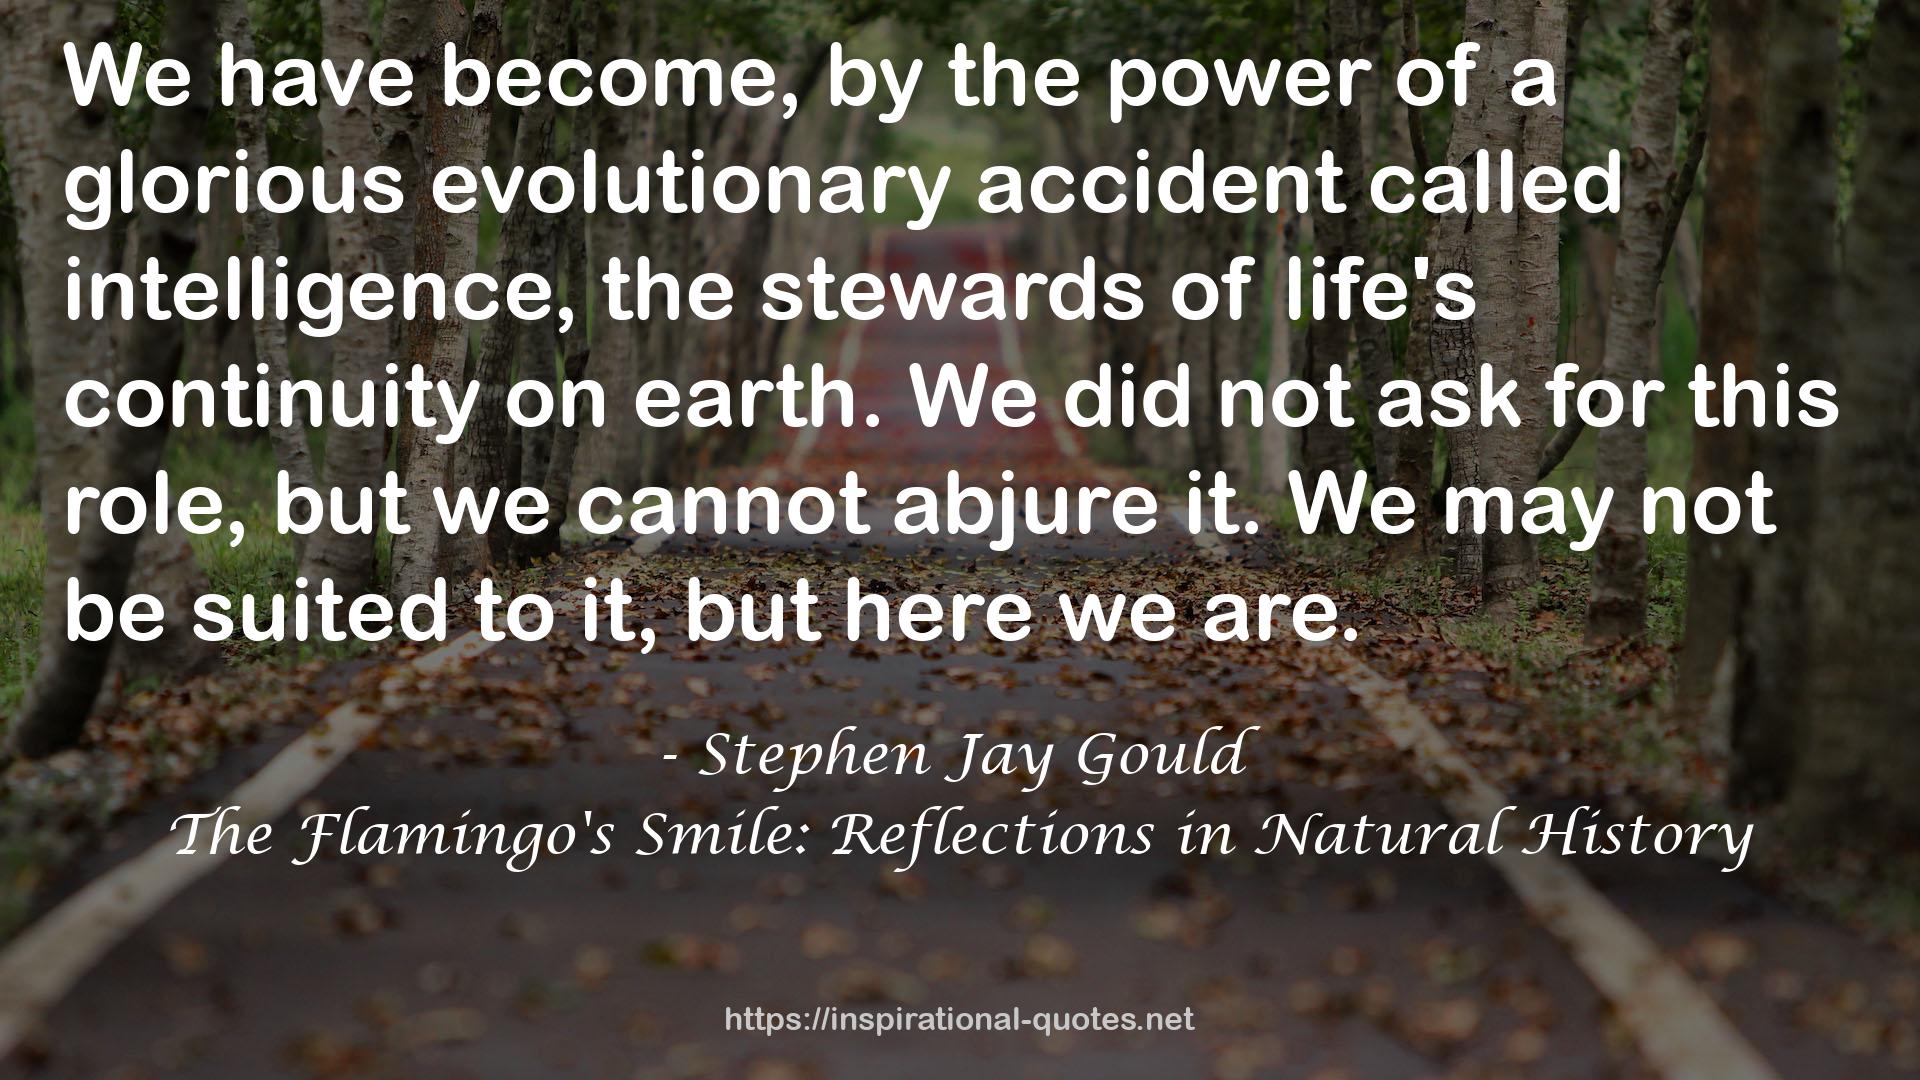 The Flamingo's Smile: Reflections in Natural History QUOTES